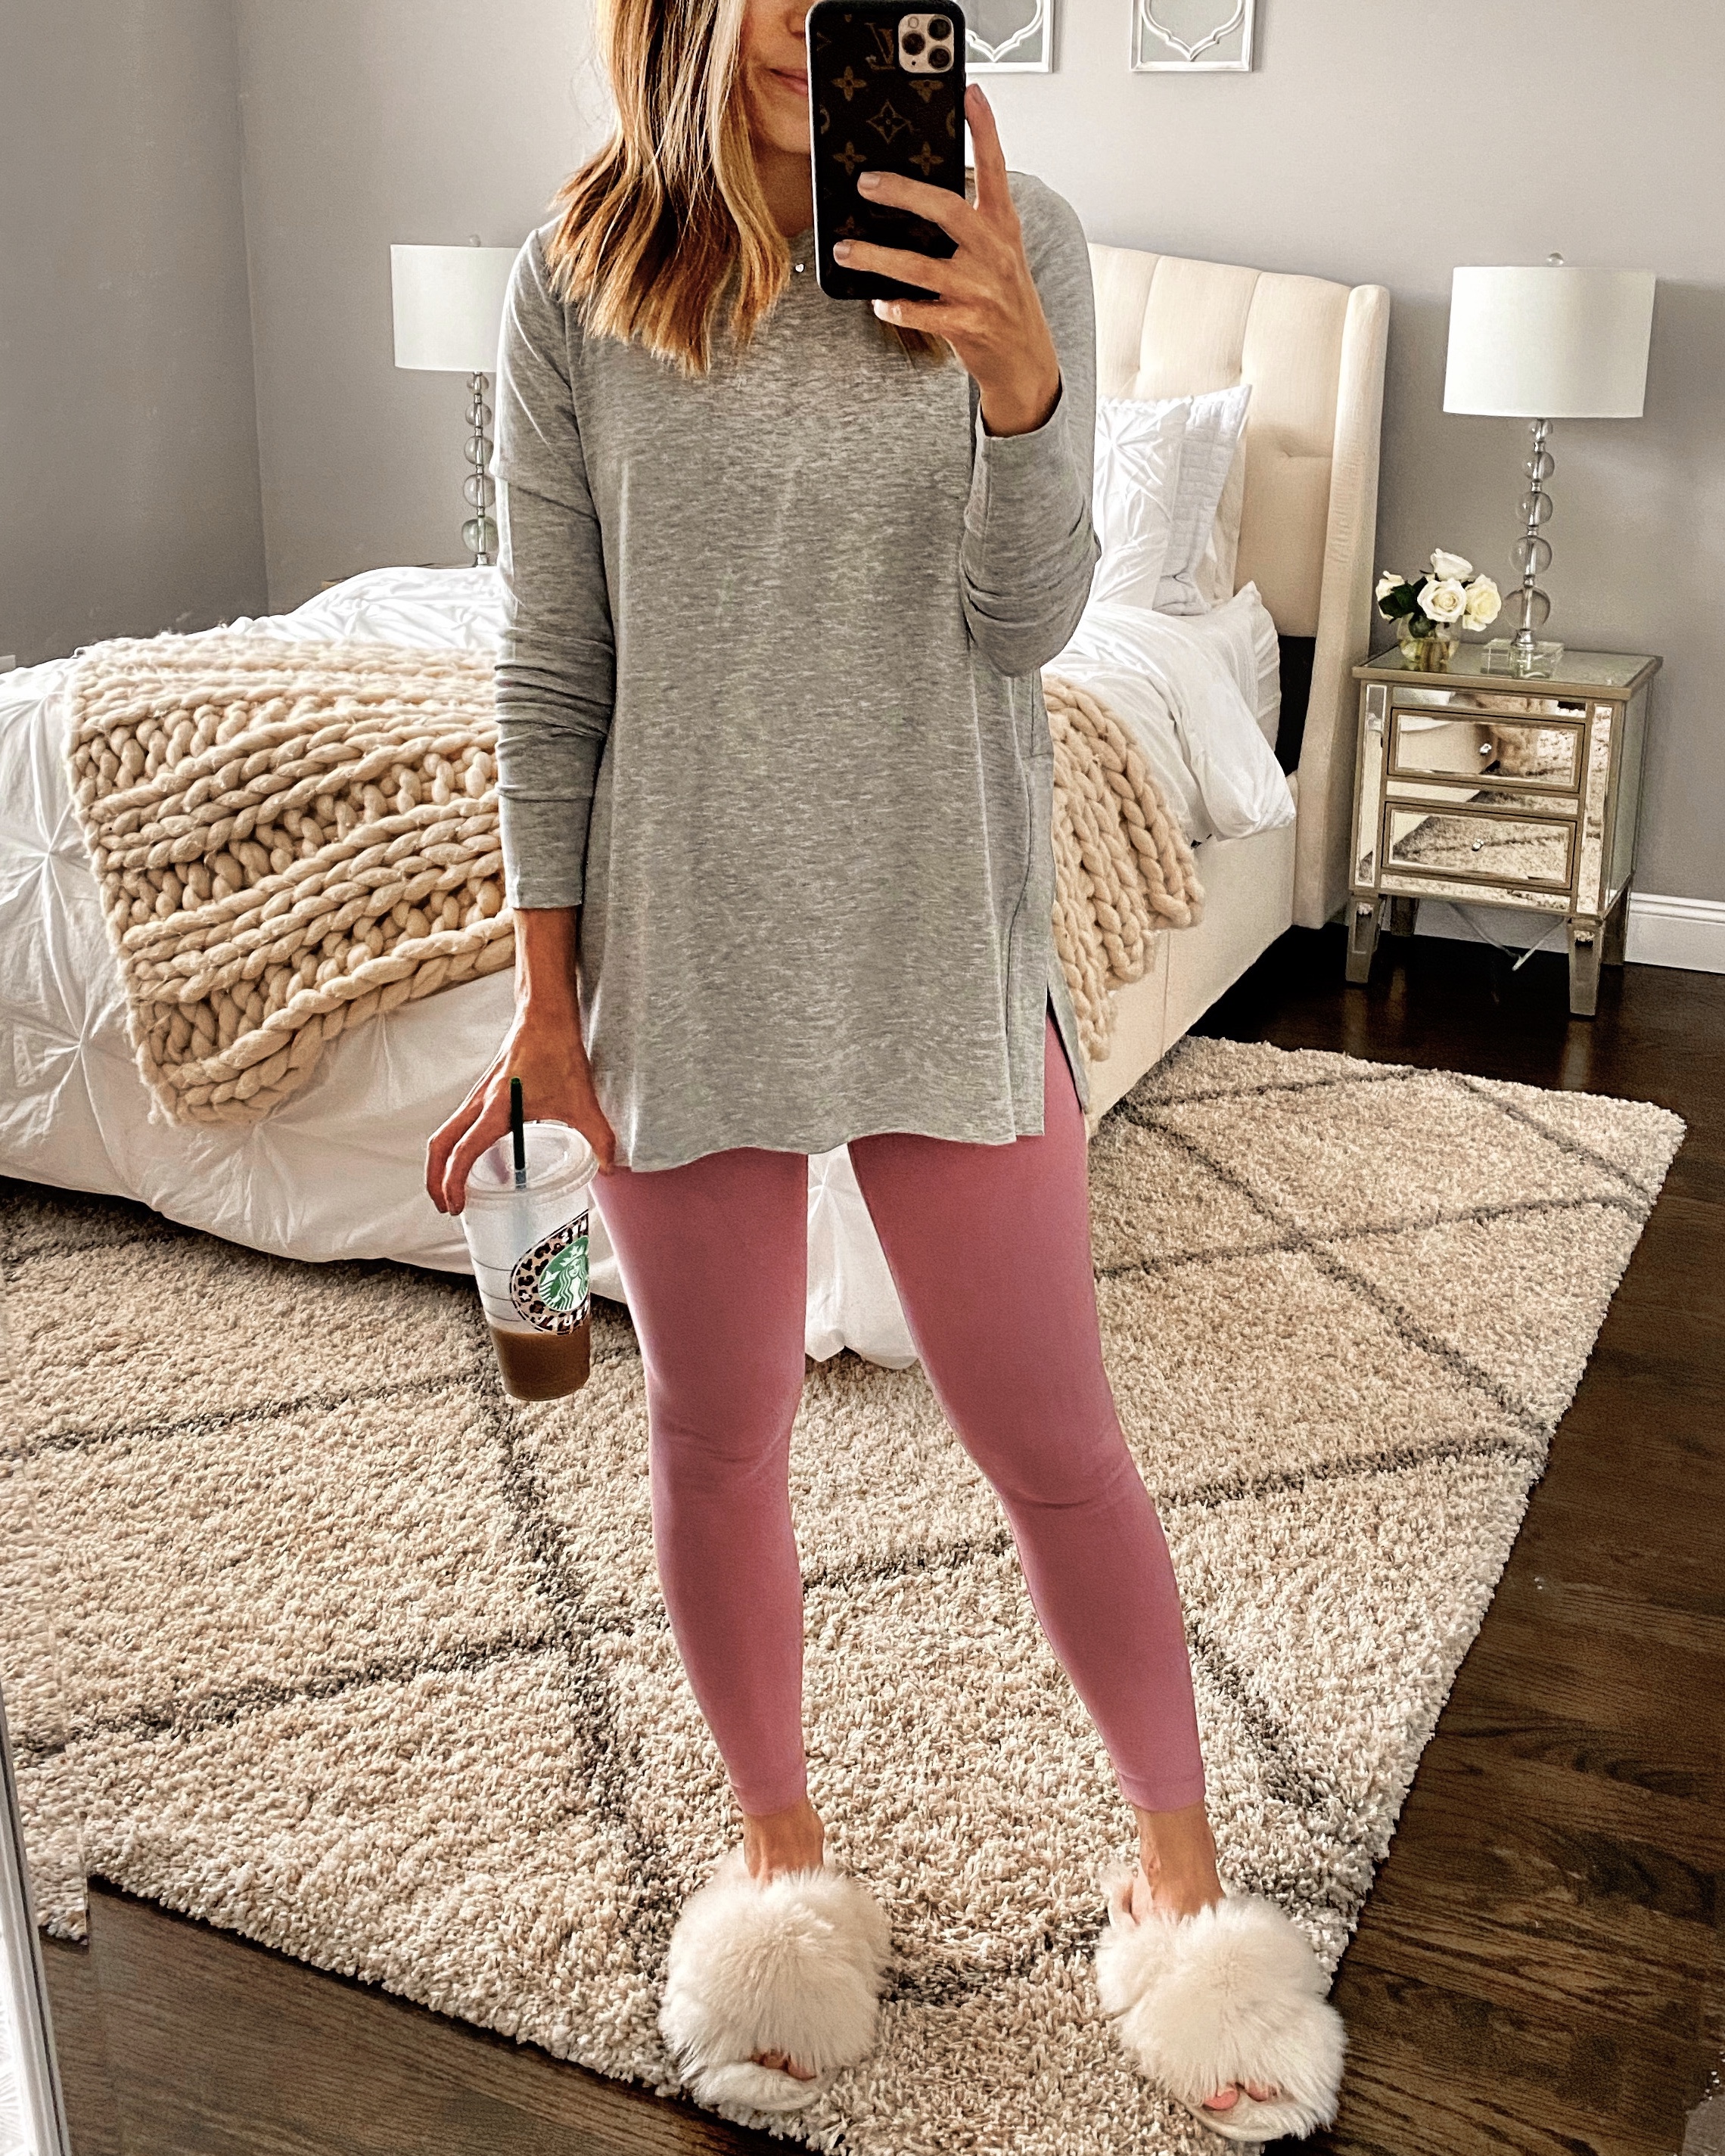 Black Leggings 44 Outfit Ideas For Women To Try Next Week 2020